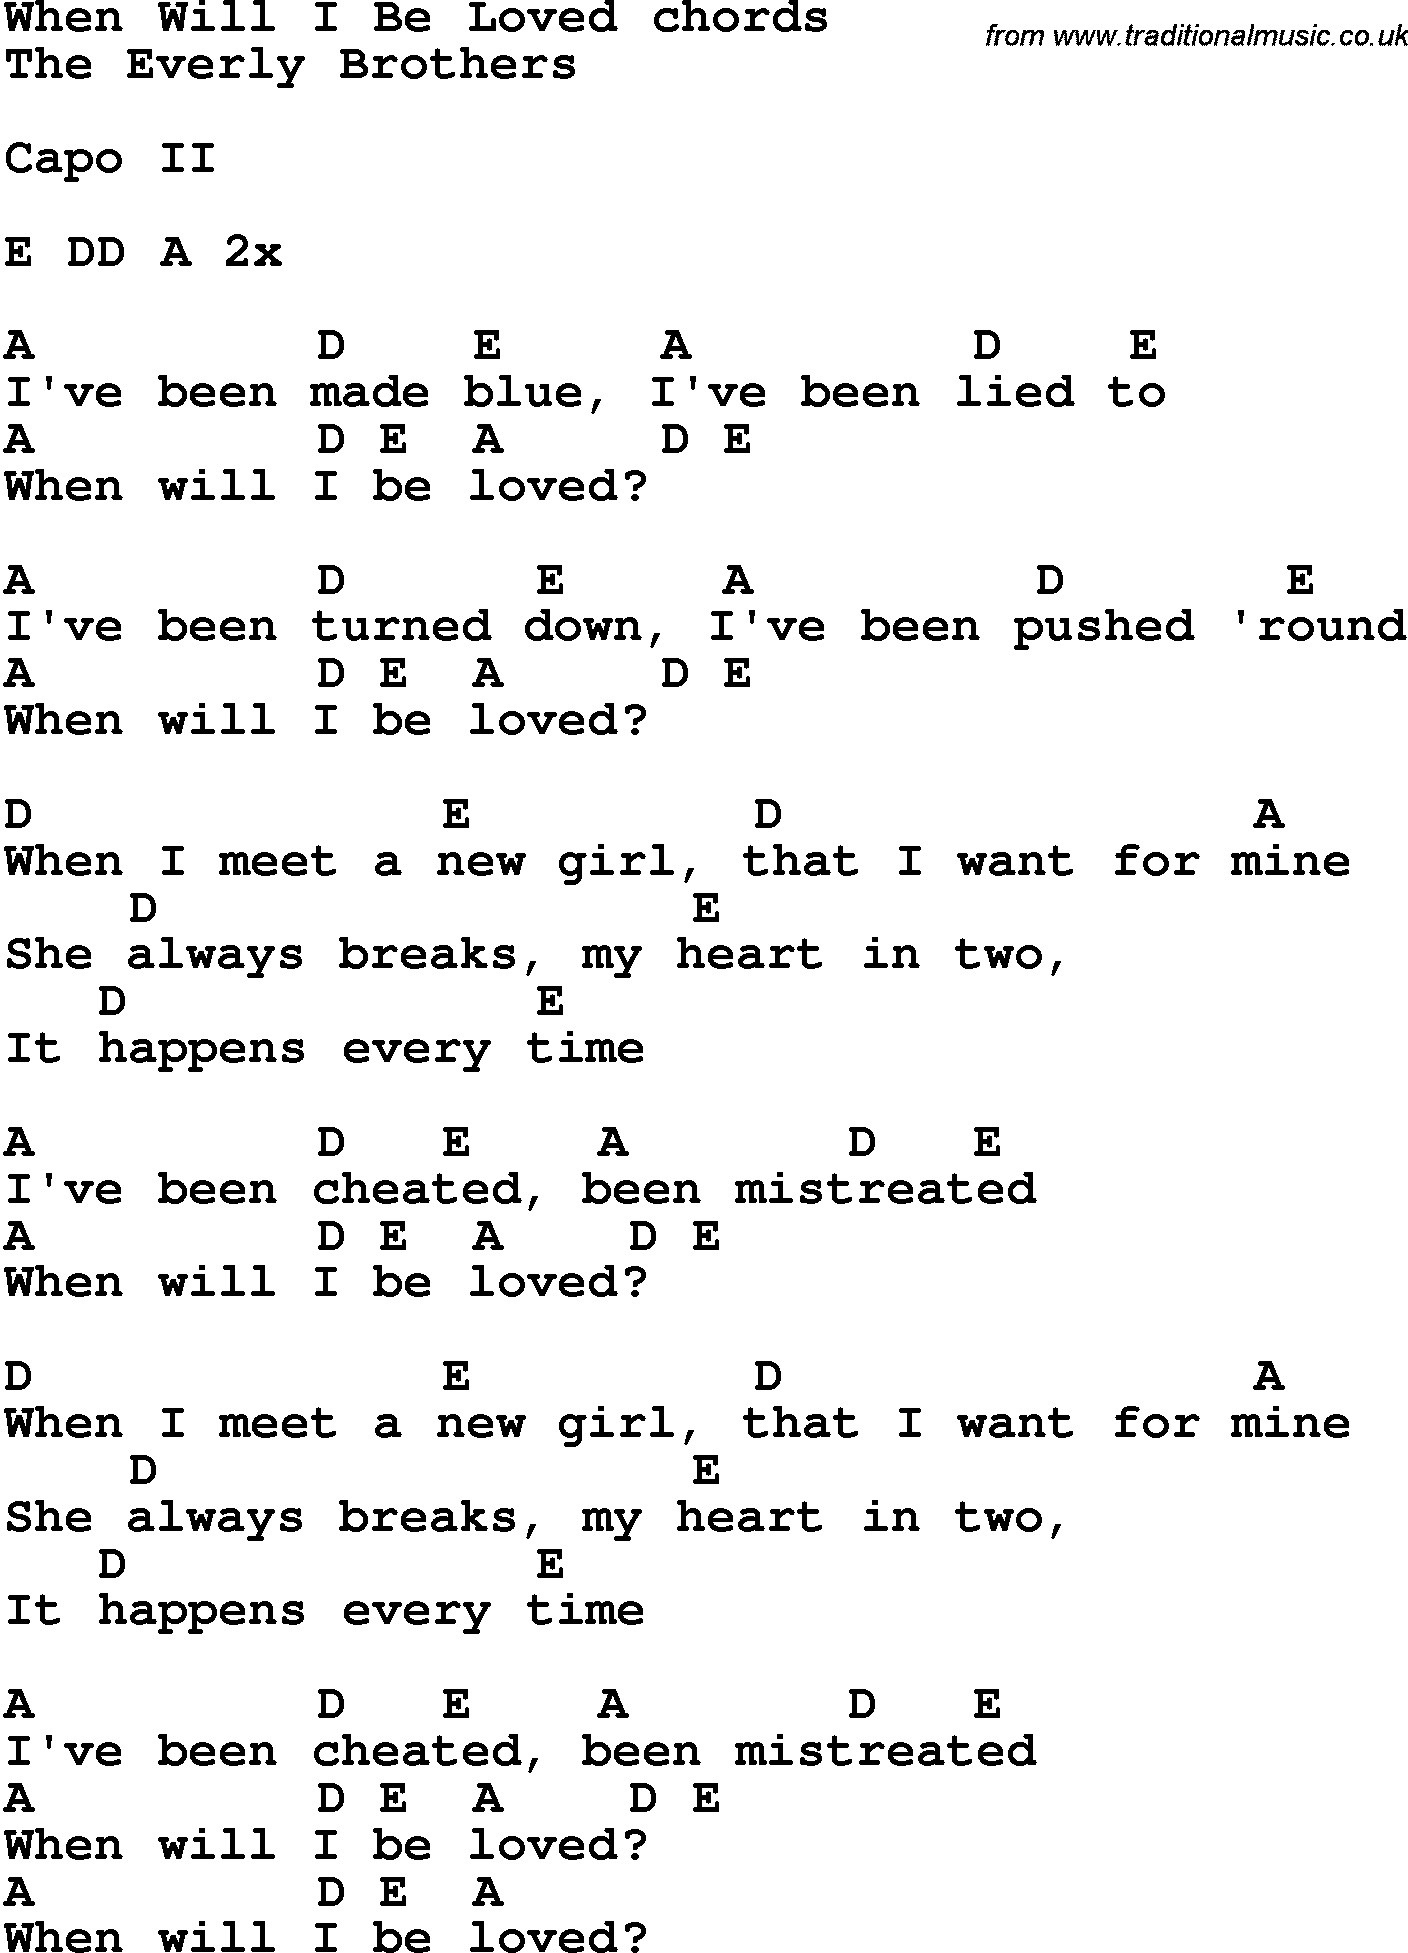 Song Lyrics with guitar chords for When Will I Be Loved - The Everly Brothers